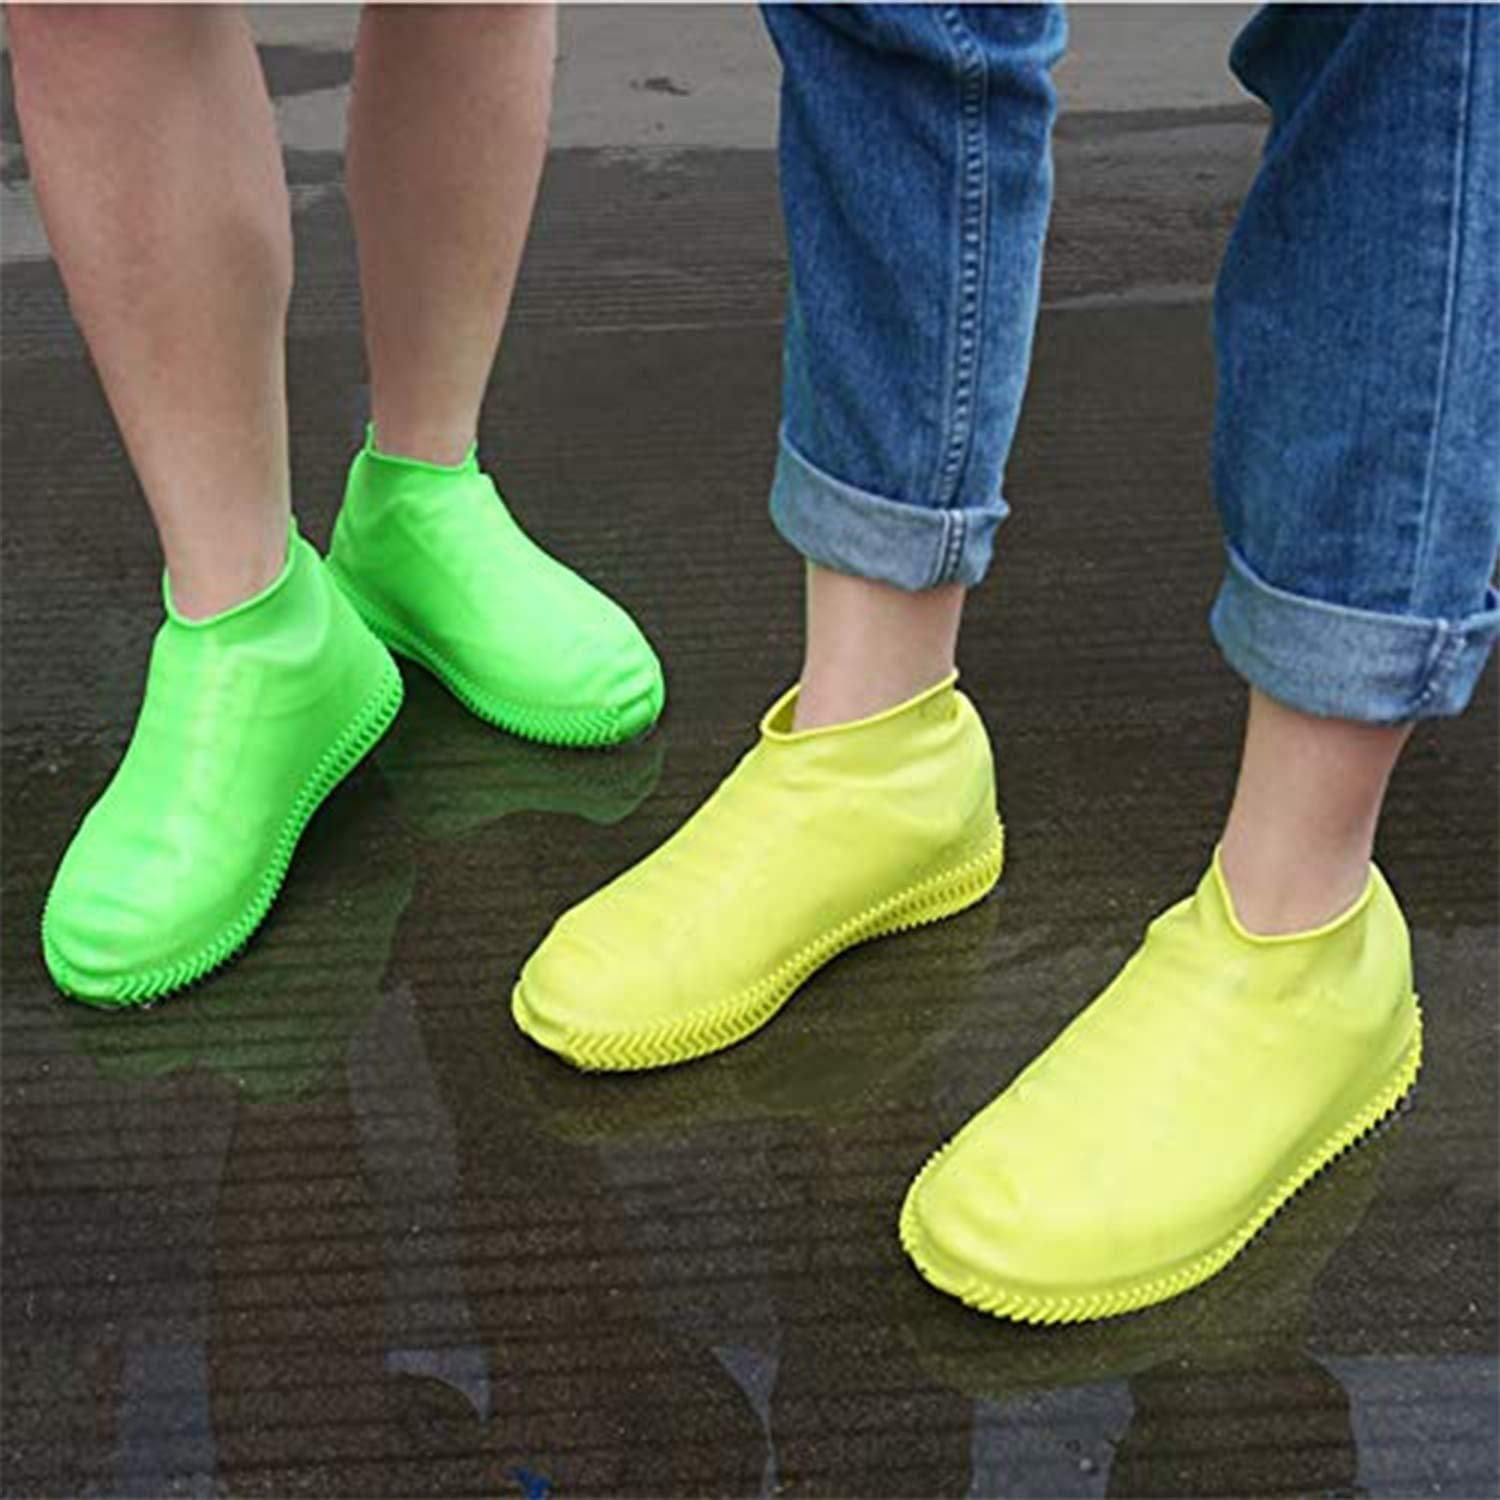 Silicone Reusable Waterproof Shoe Cover (Assorted Colors) Zaavio®